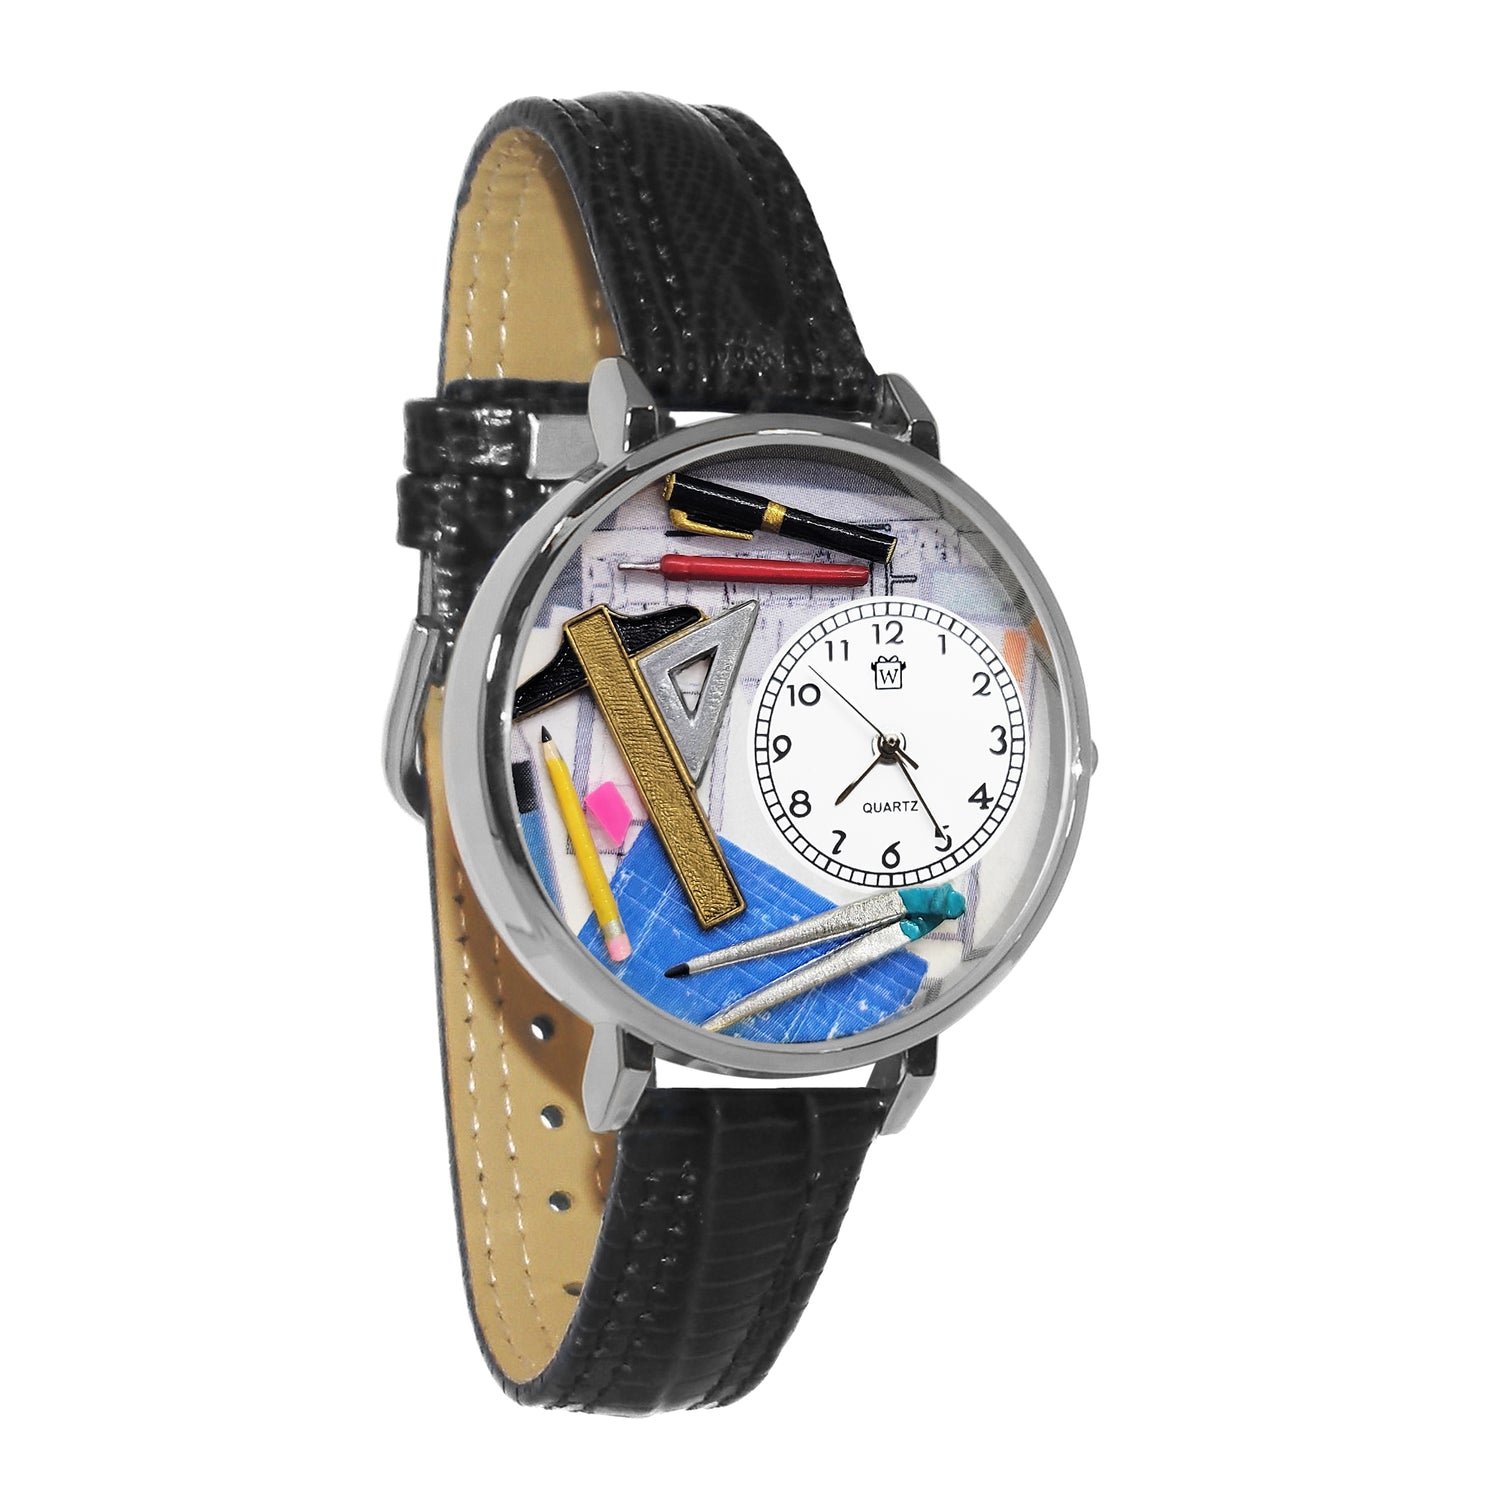 Whimsical Gifts | Architect 3D Watch Large Style | Handmade in USA | Professions Themed | Business & Legal | Novelty Unique Fun Miniatures Gift | Silver Finish Black Leather Watch Band